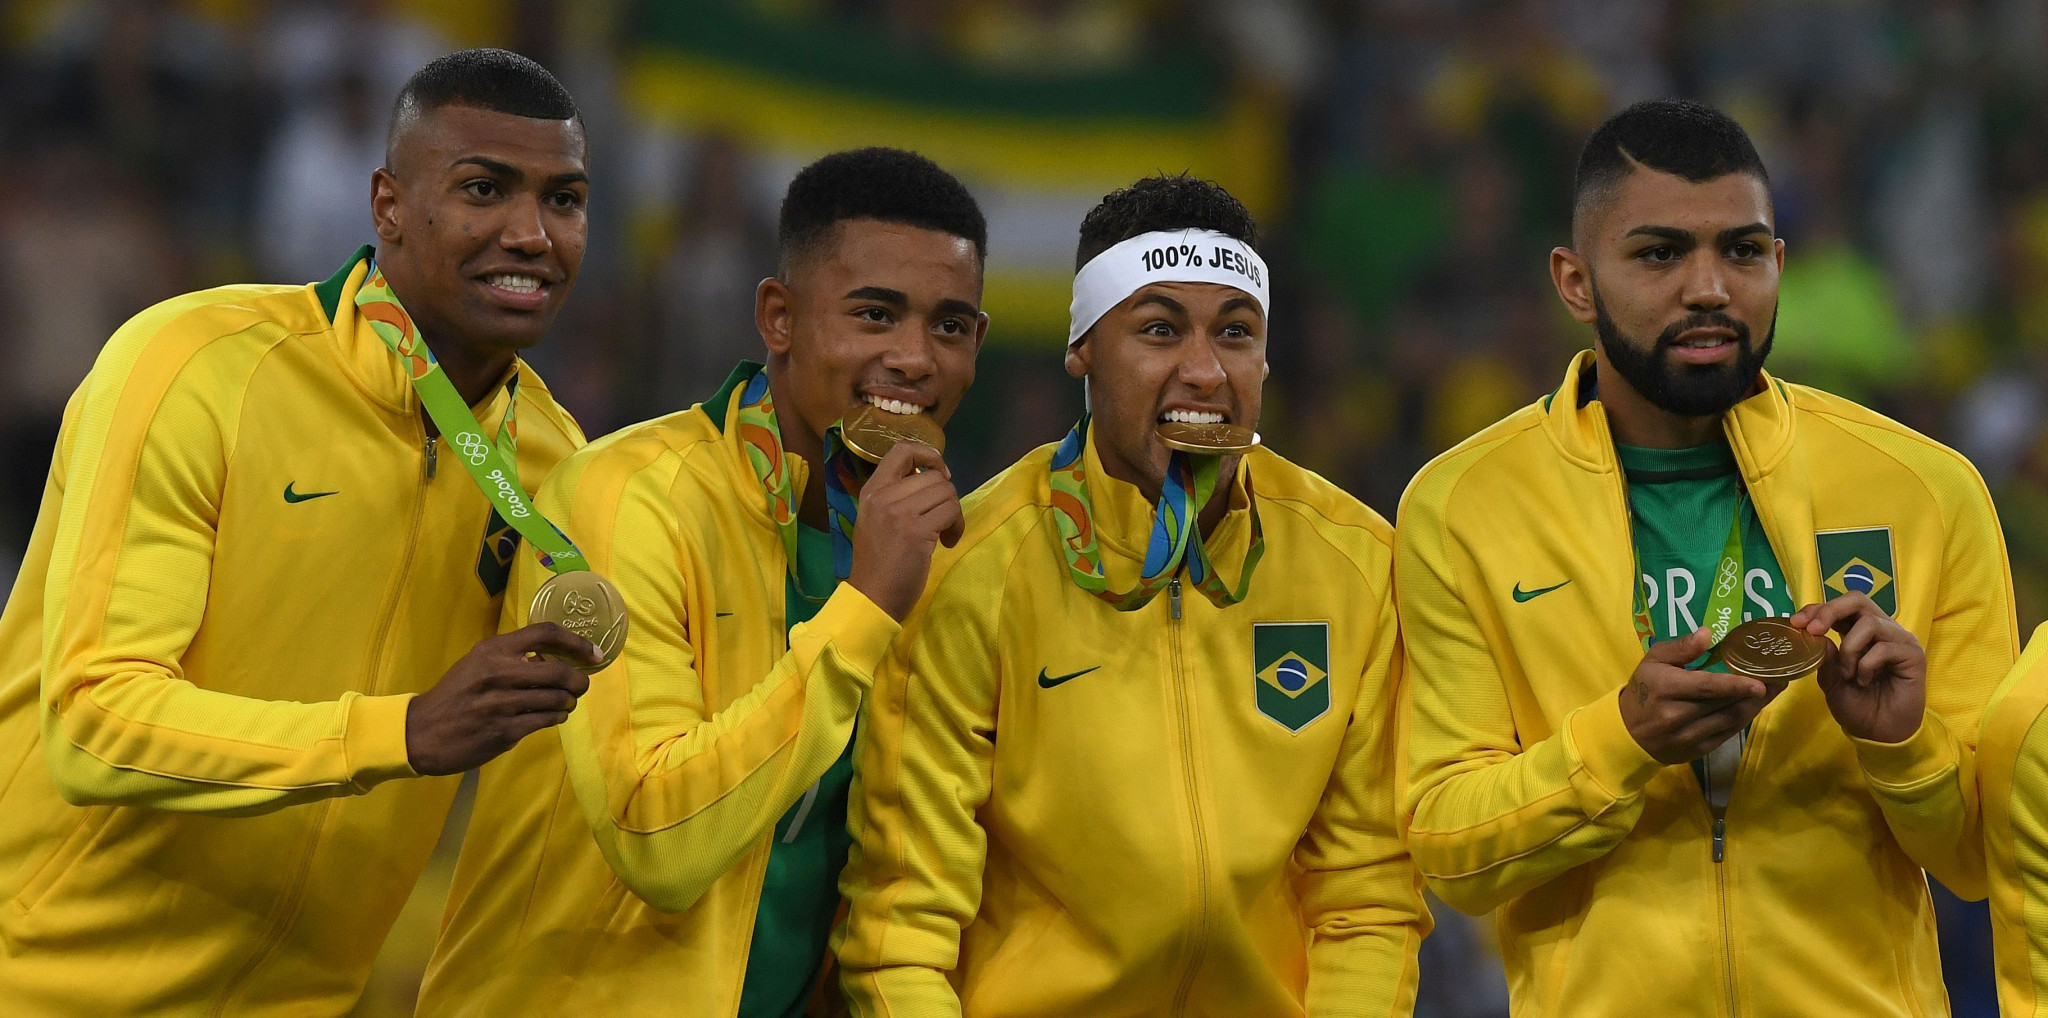 Brazil celebrate winning Olympic gold at Rio 2016 - now they must qualify to defend their title at Tokyo 2020 ©Getty Images